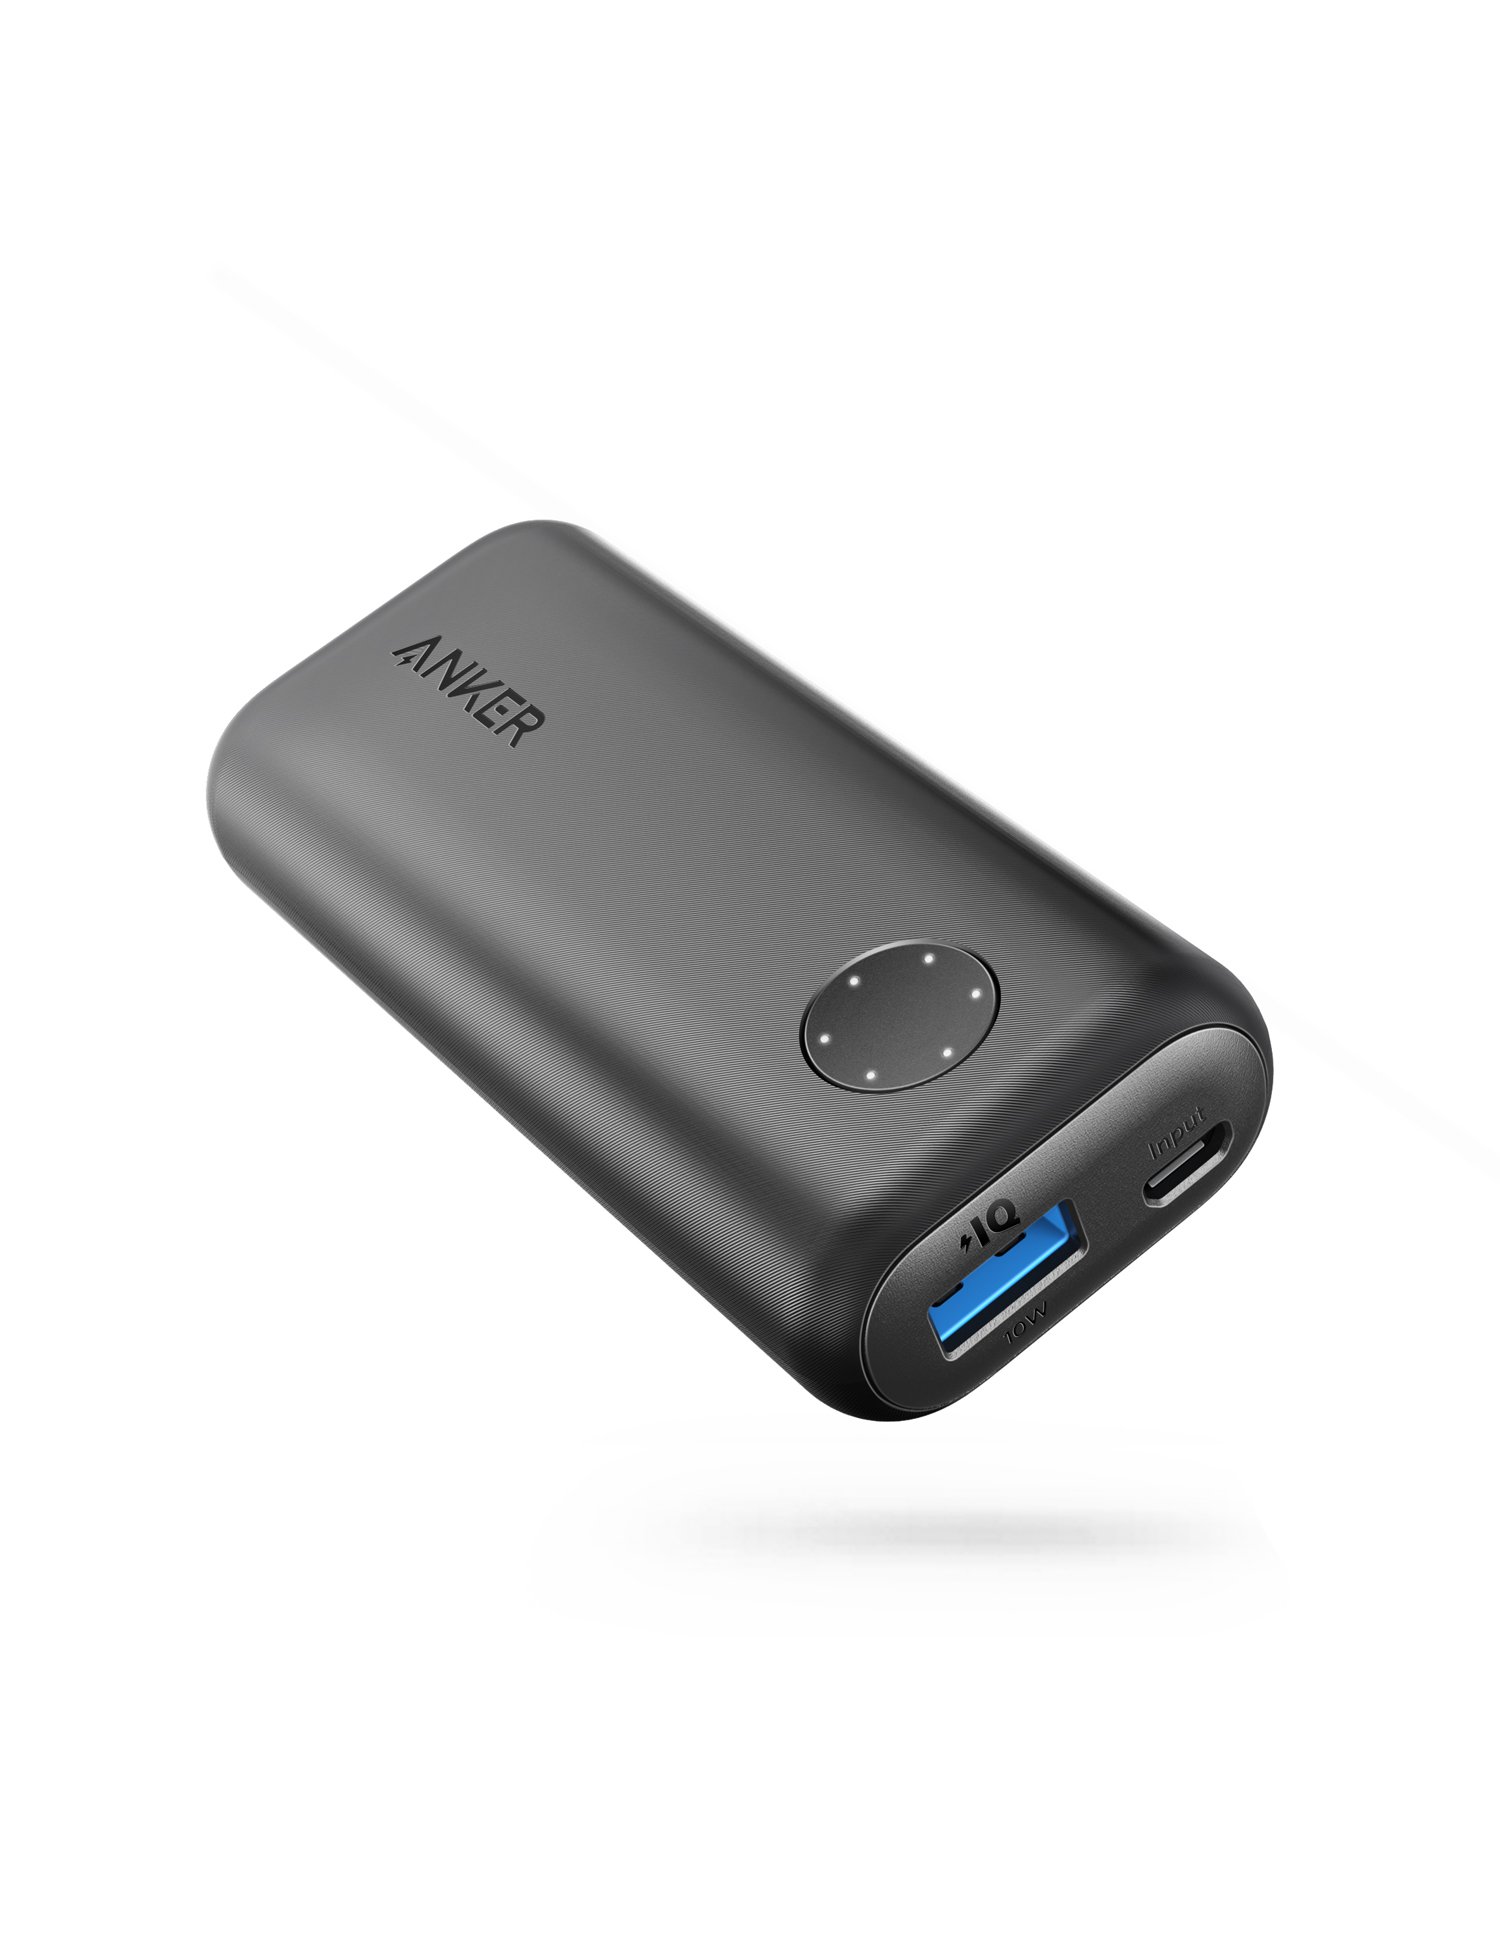 Anker PowerCore II 6700, Compact Portable Charger for iPhone X / 8 / 8 Plus, Samsung, and Other Smartphones